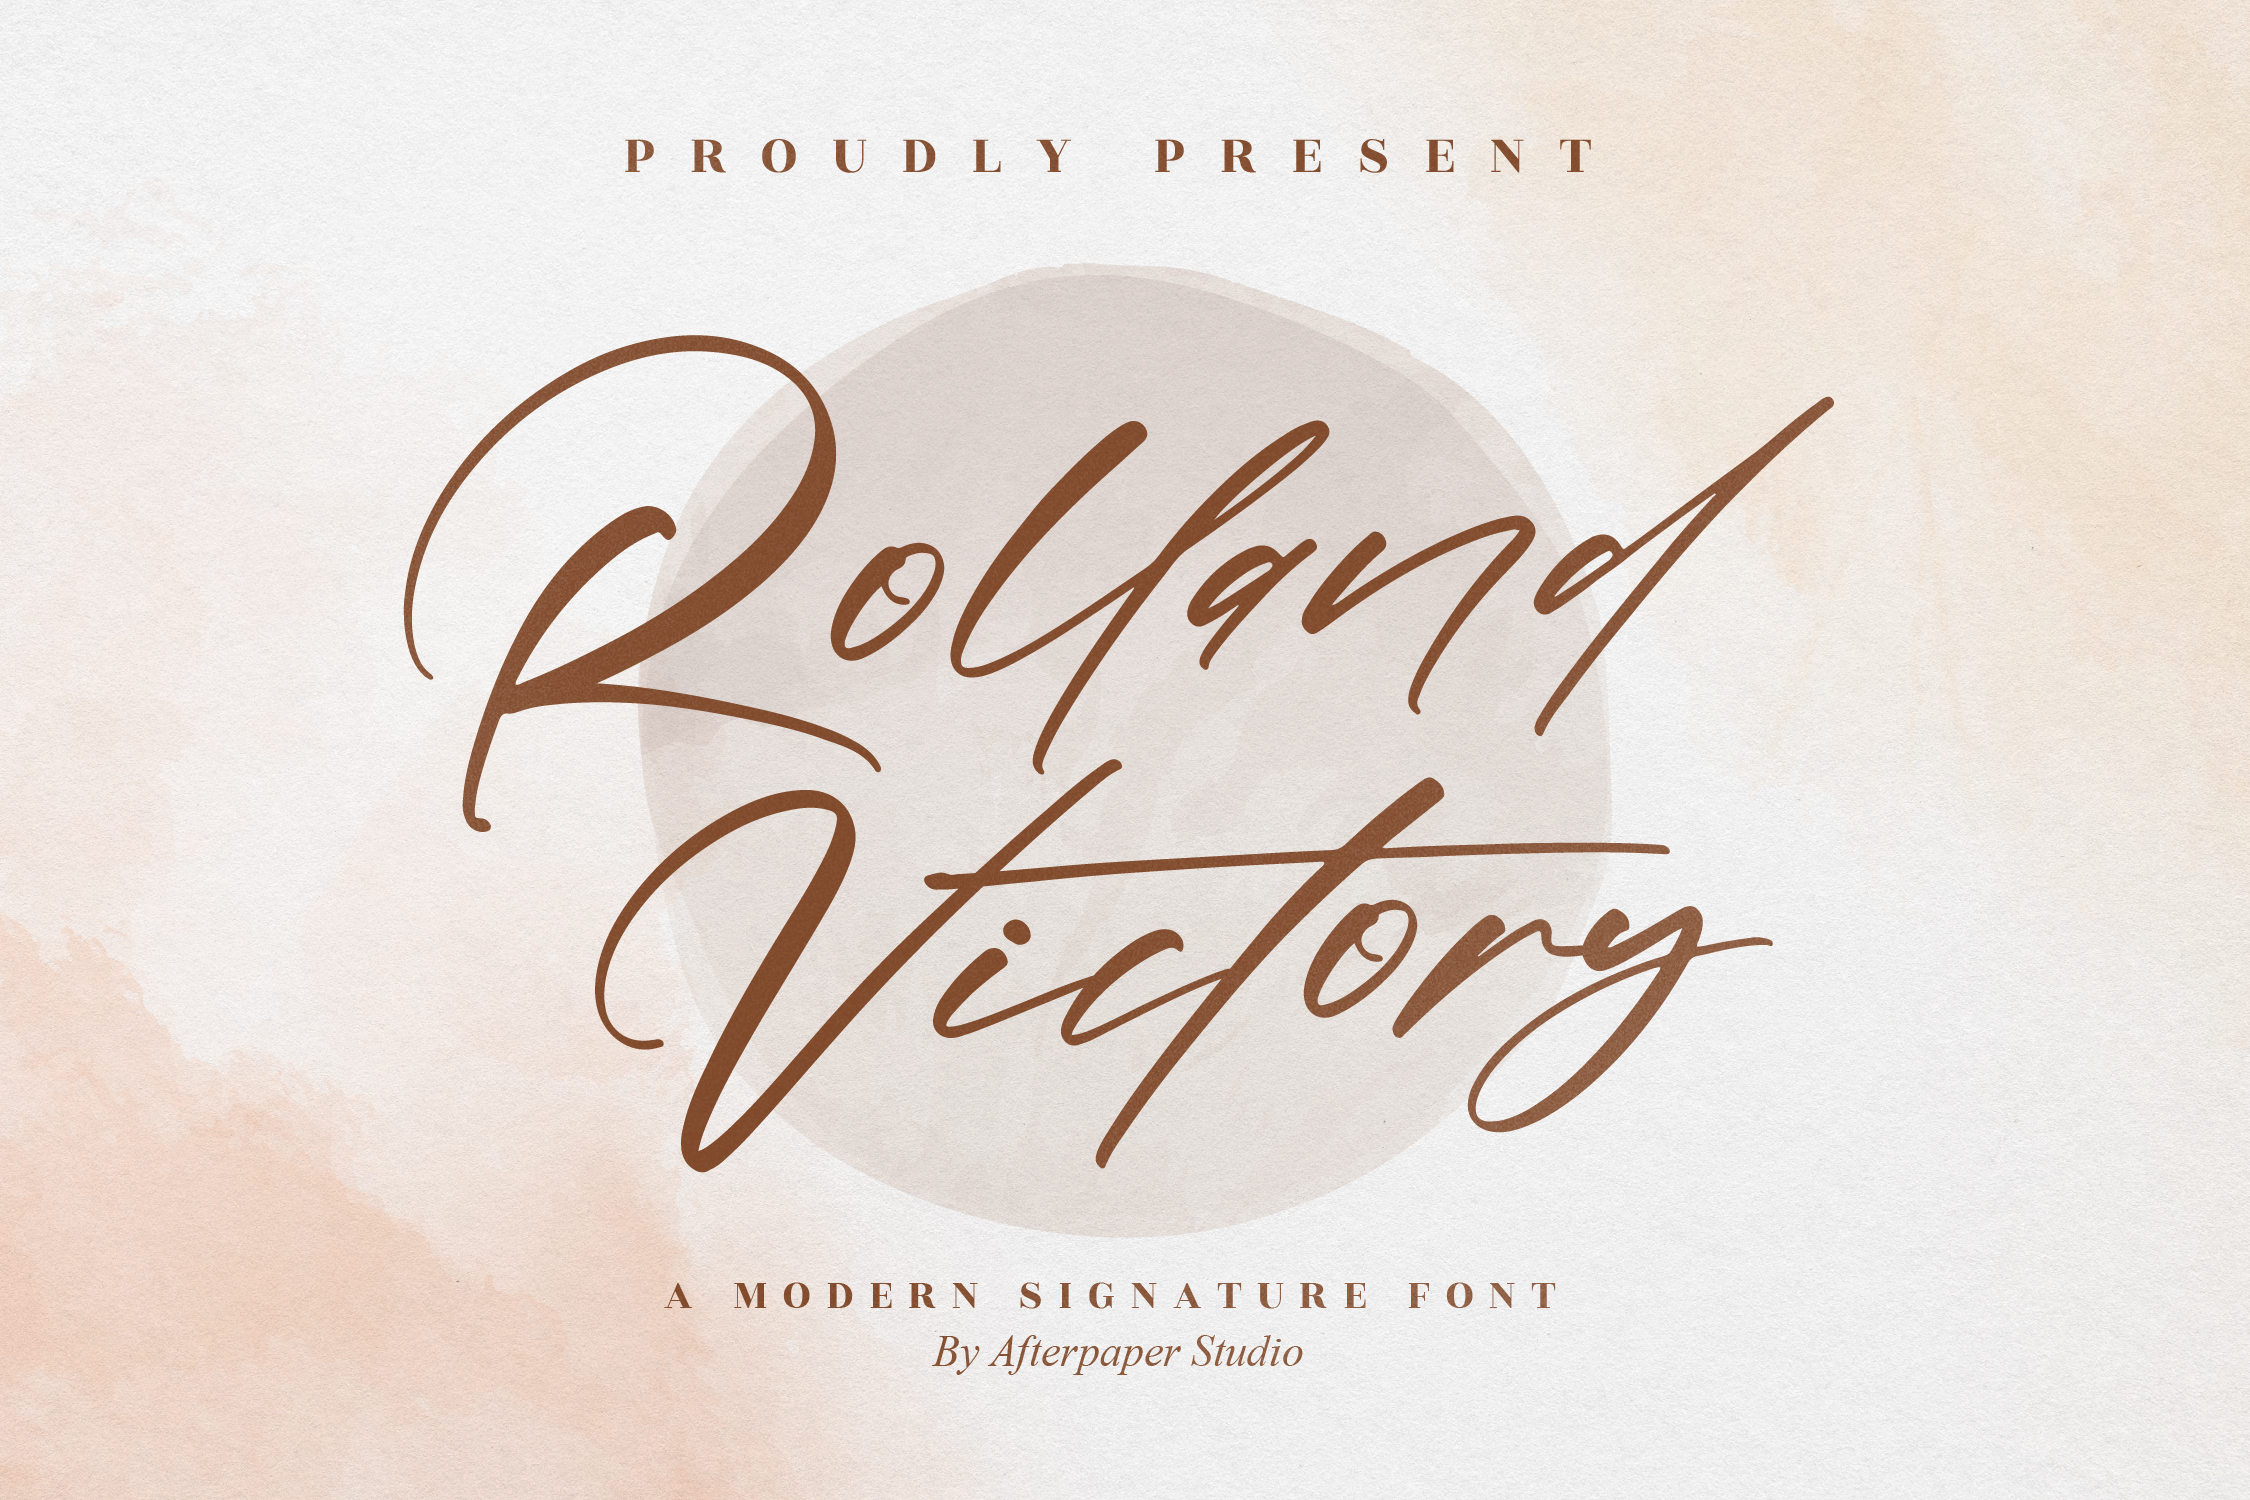 Rolland Victory